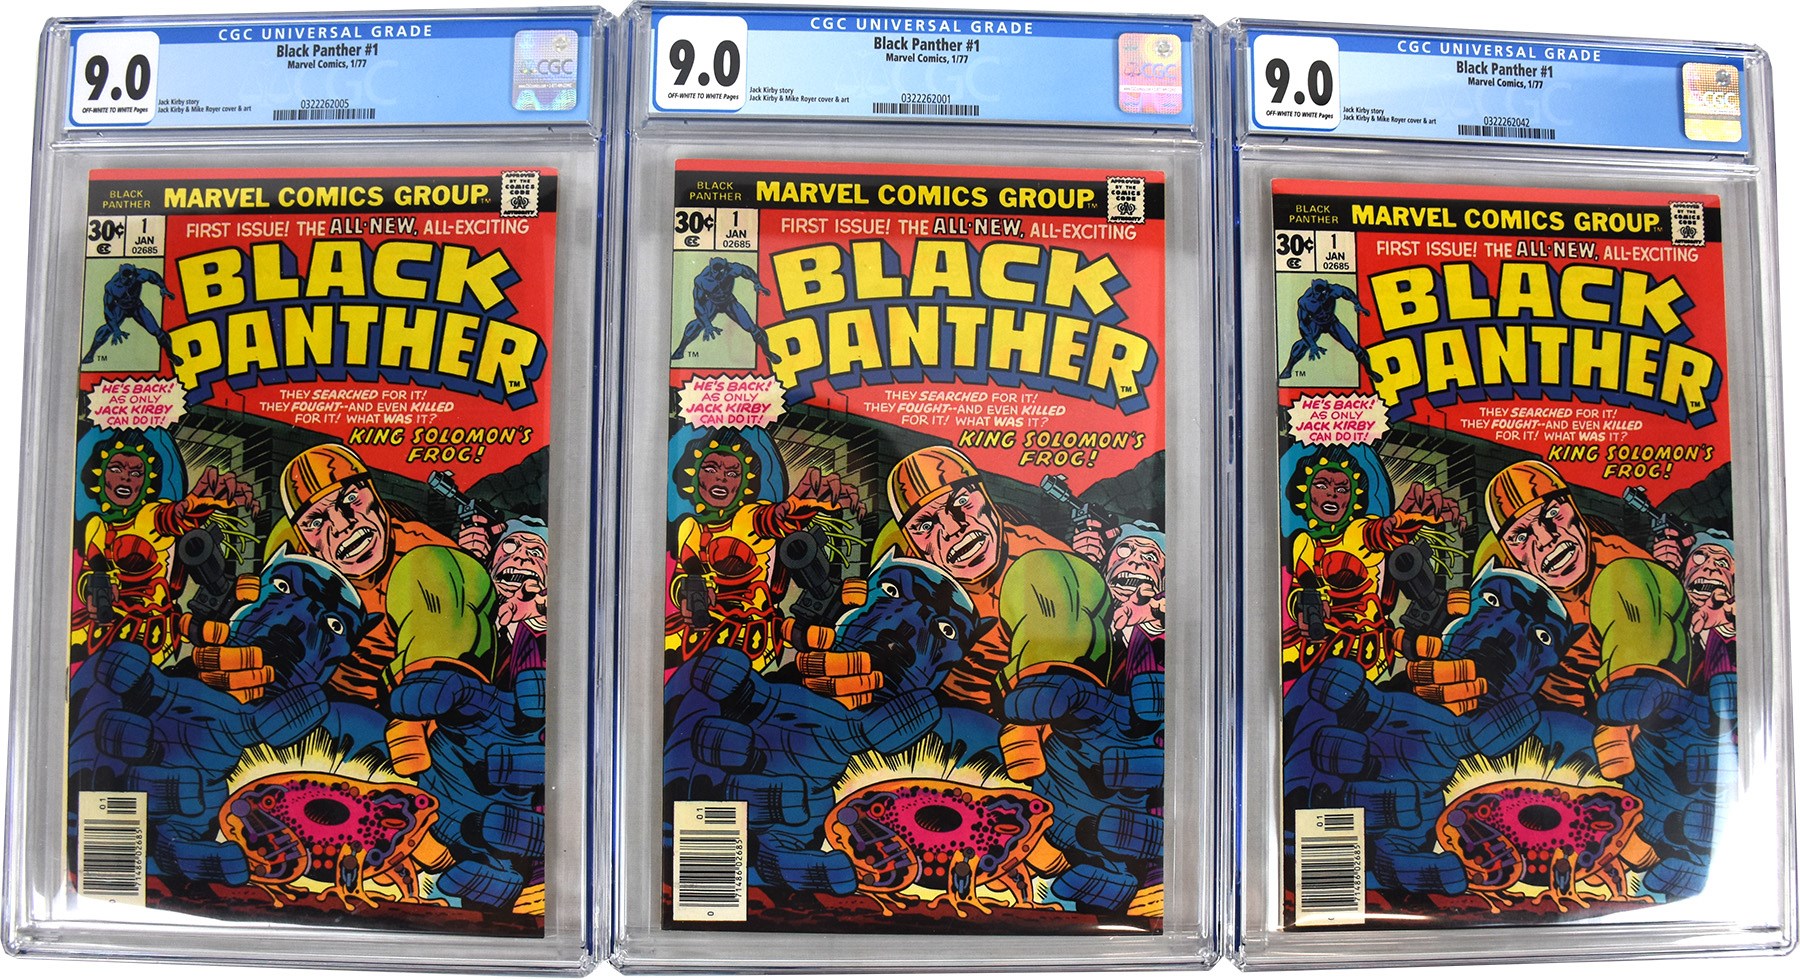 Comics - Three Issues of Black Panther #1 - All Are CGC 9.0